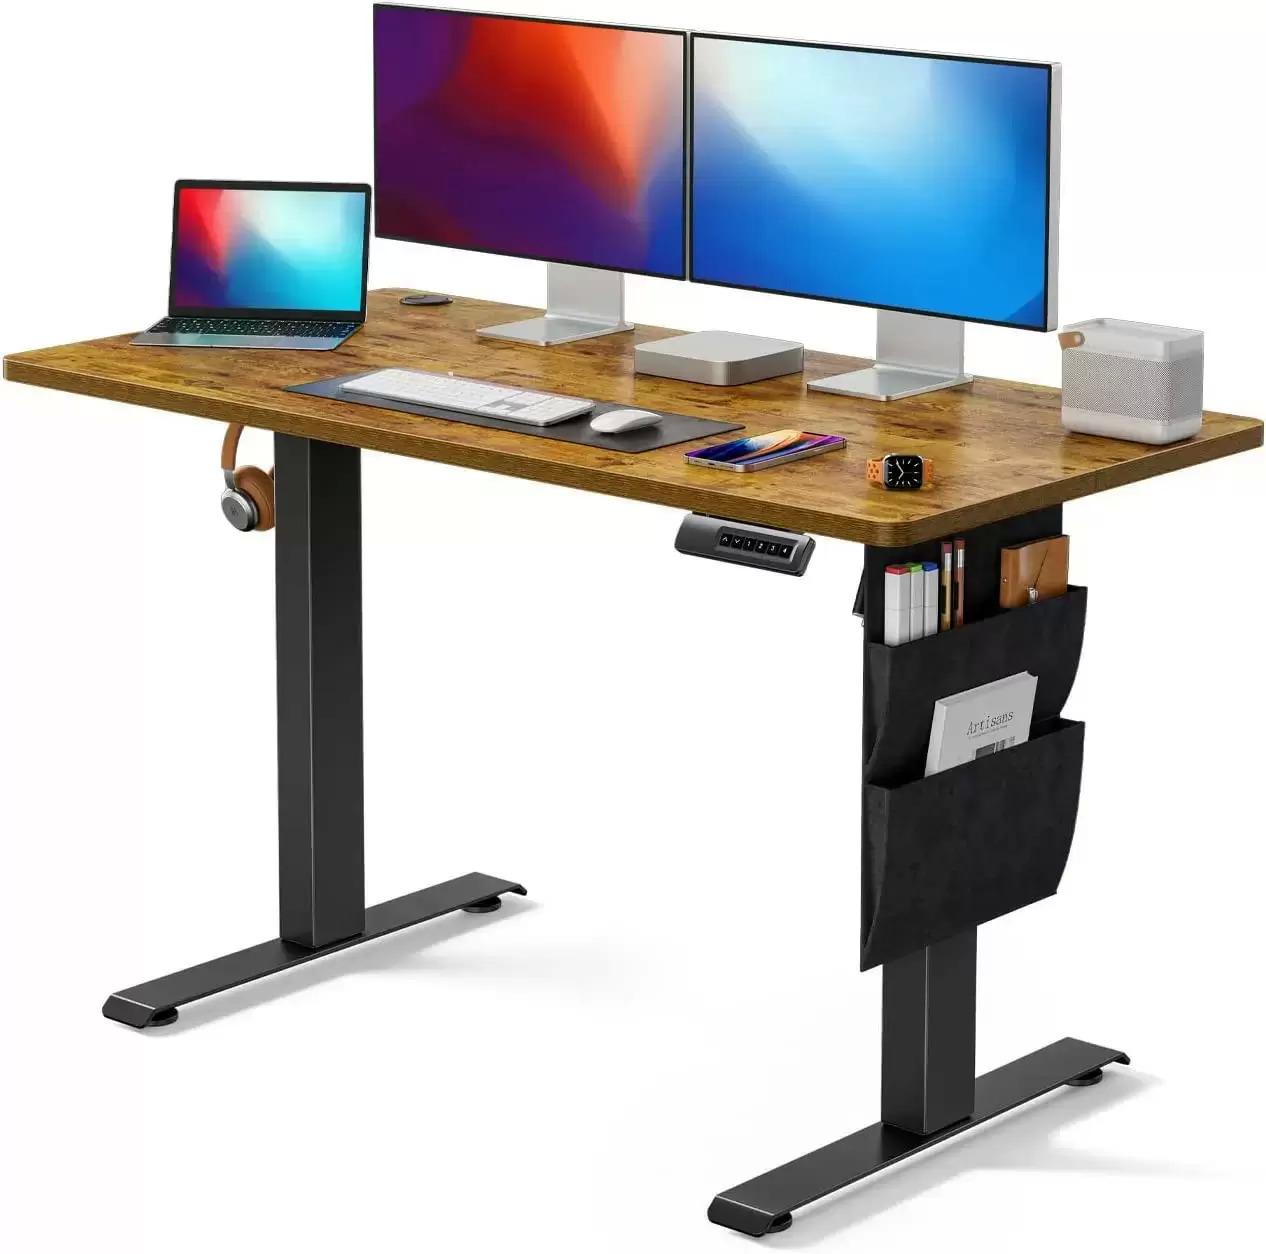 Marsail Adjustable Electric Standing Desk with Storage Bag for $109.60 Shipped